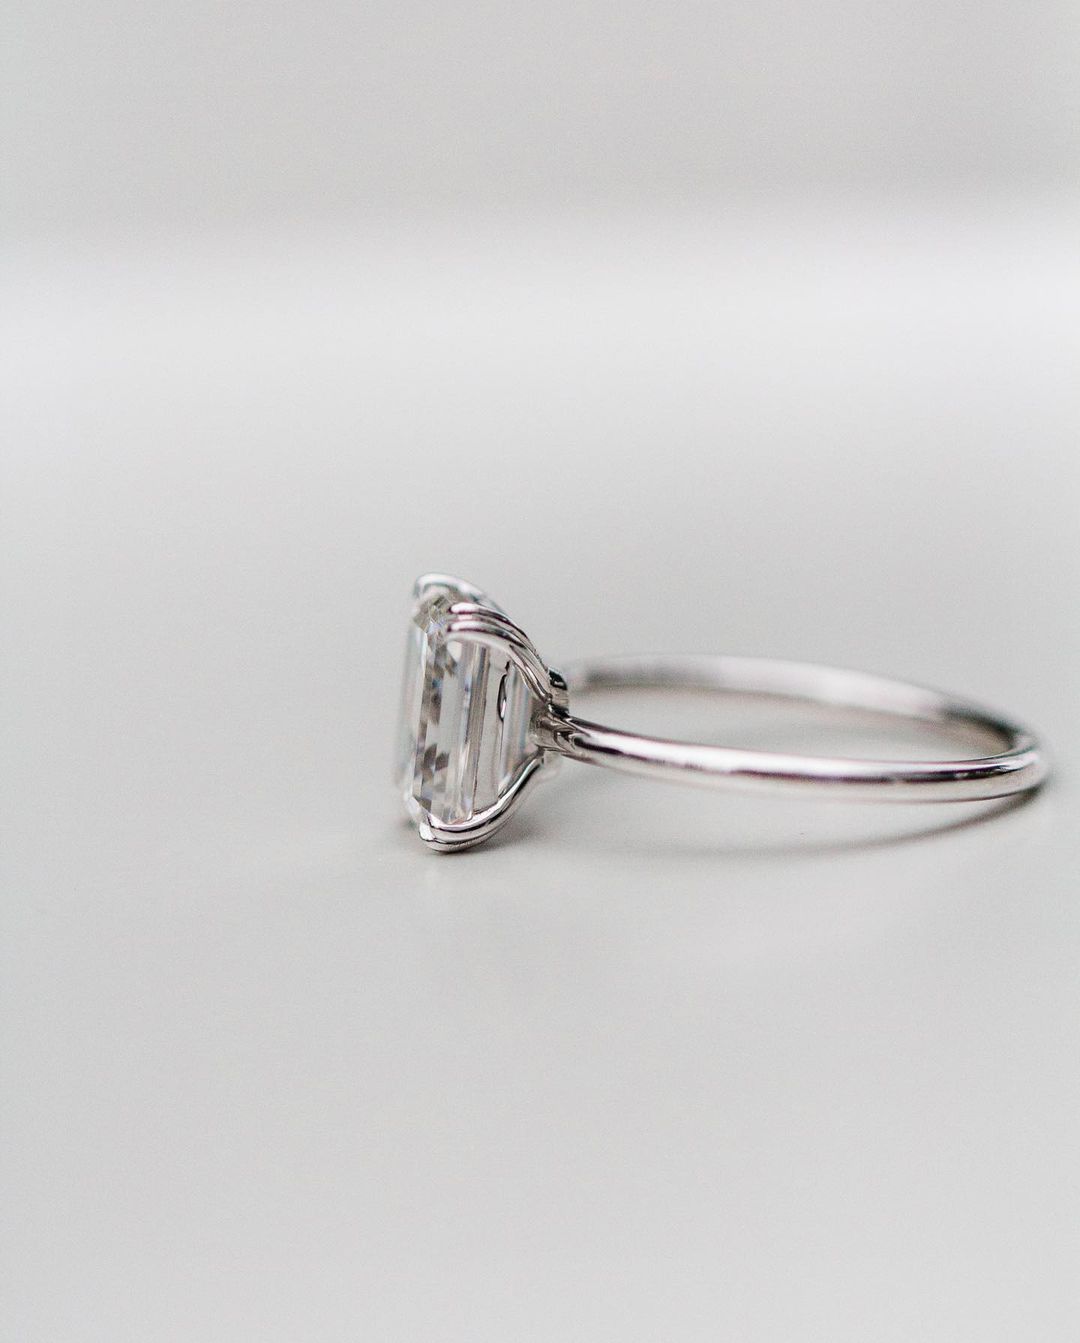 3ct Emerald Cut Moissanite Solitaire Engagement Ring